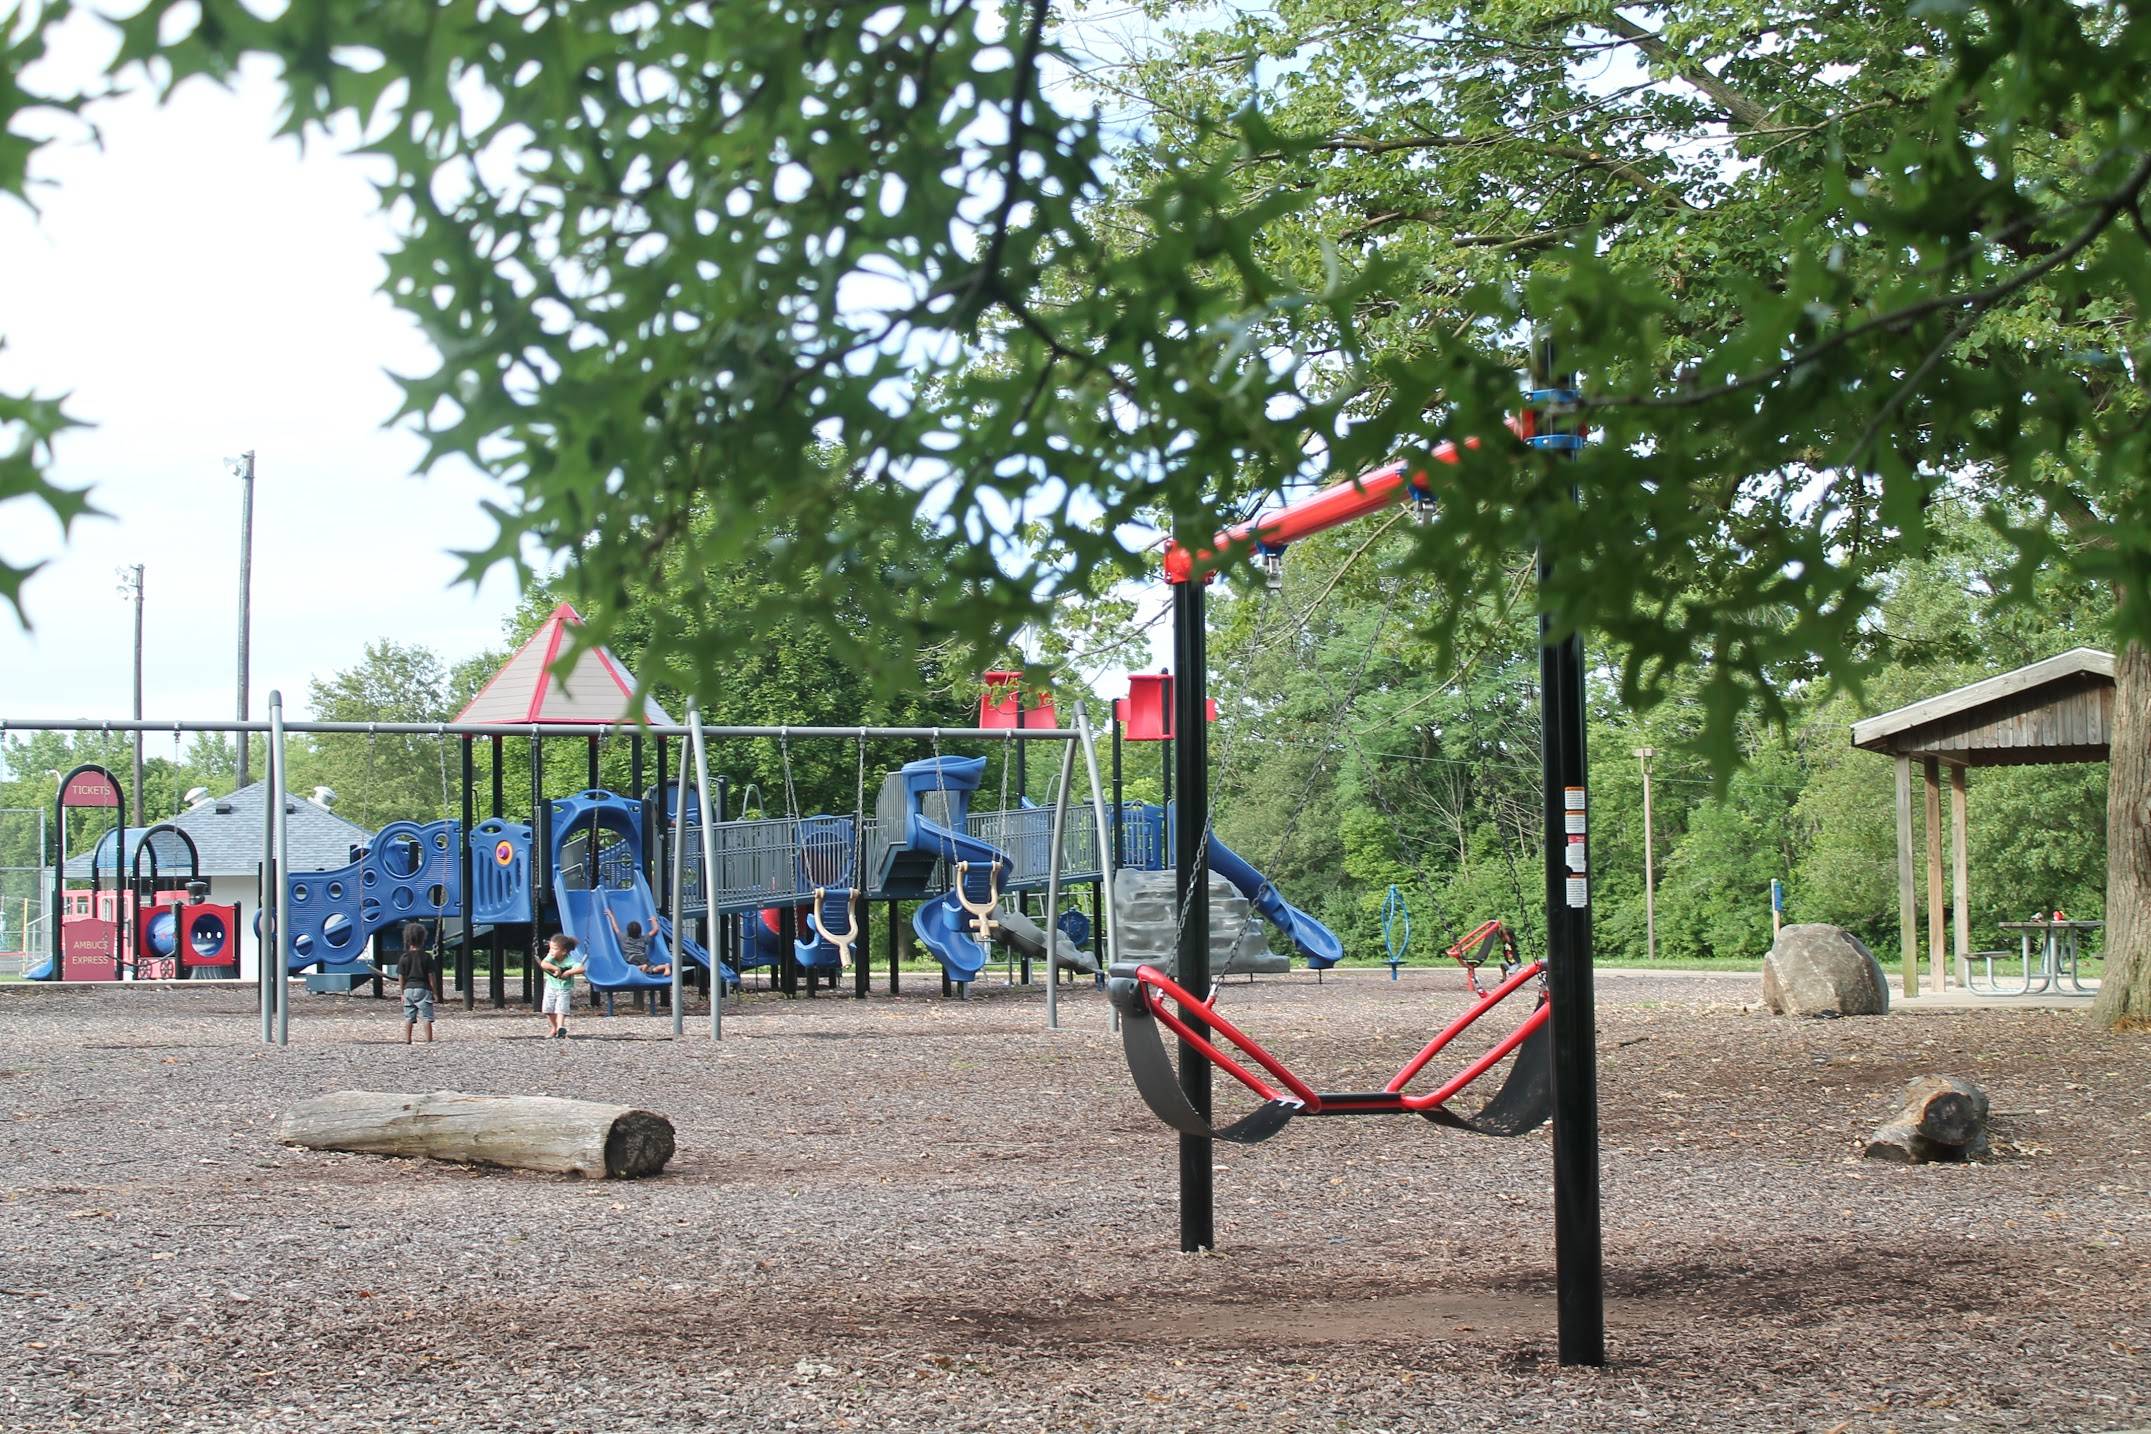 An accessible playground at Ambucs Park, featuring colorful equipment for kids. Photo by Maddie Rice.